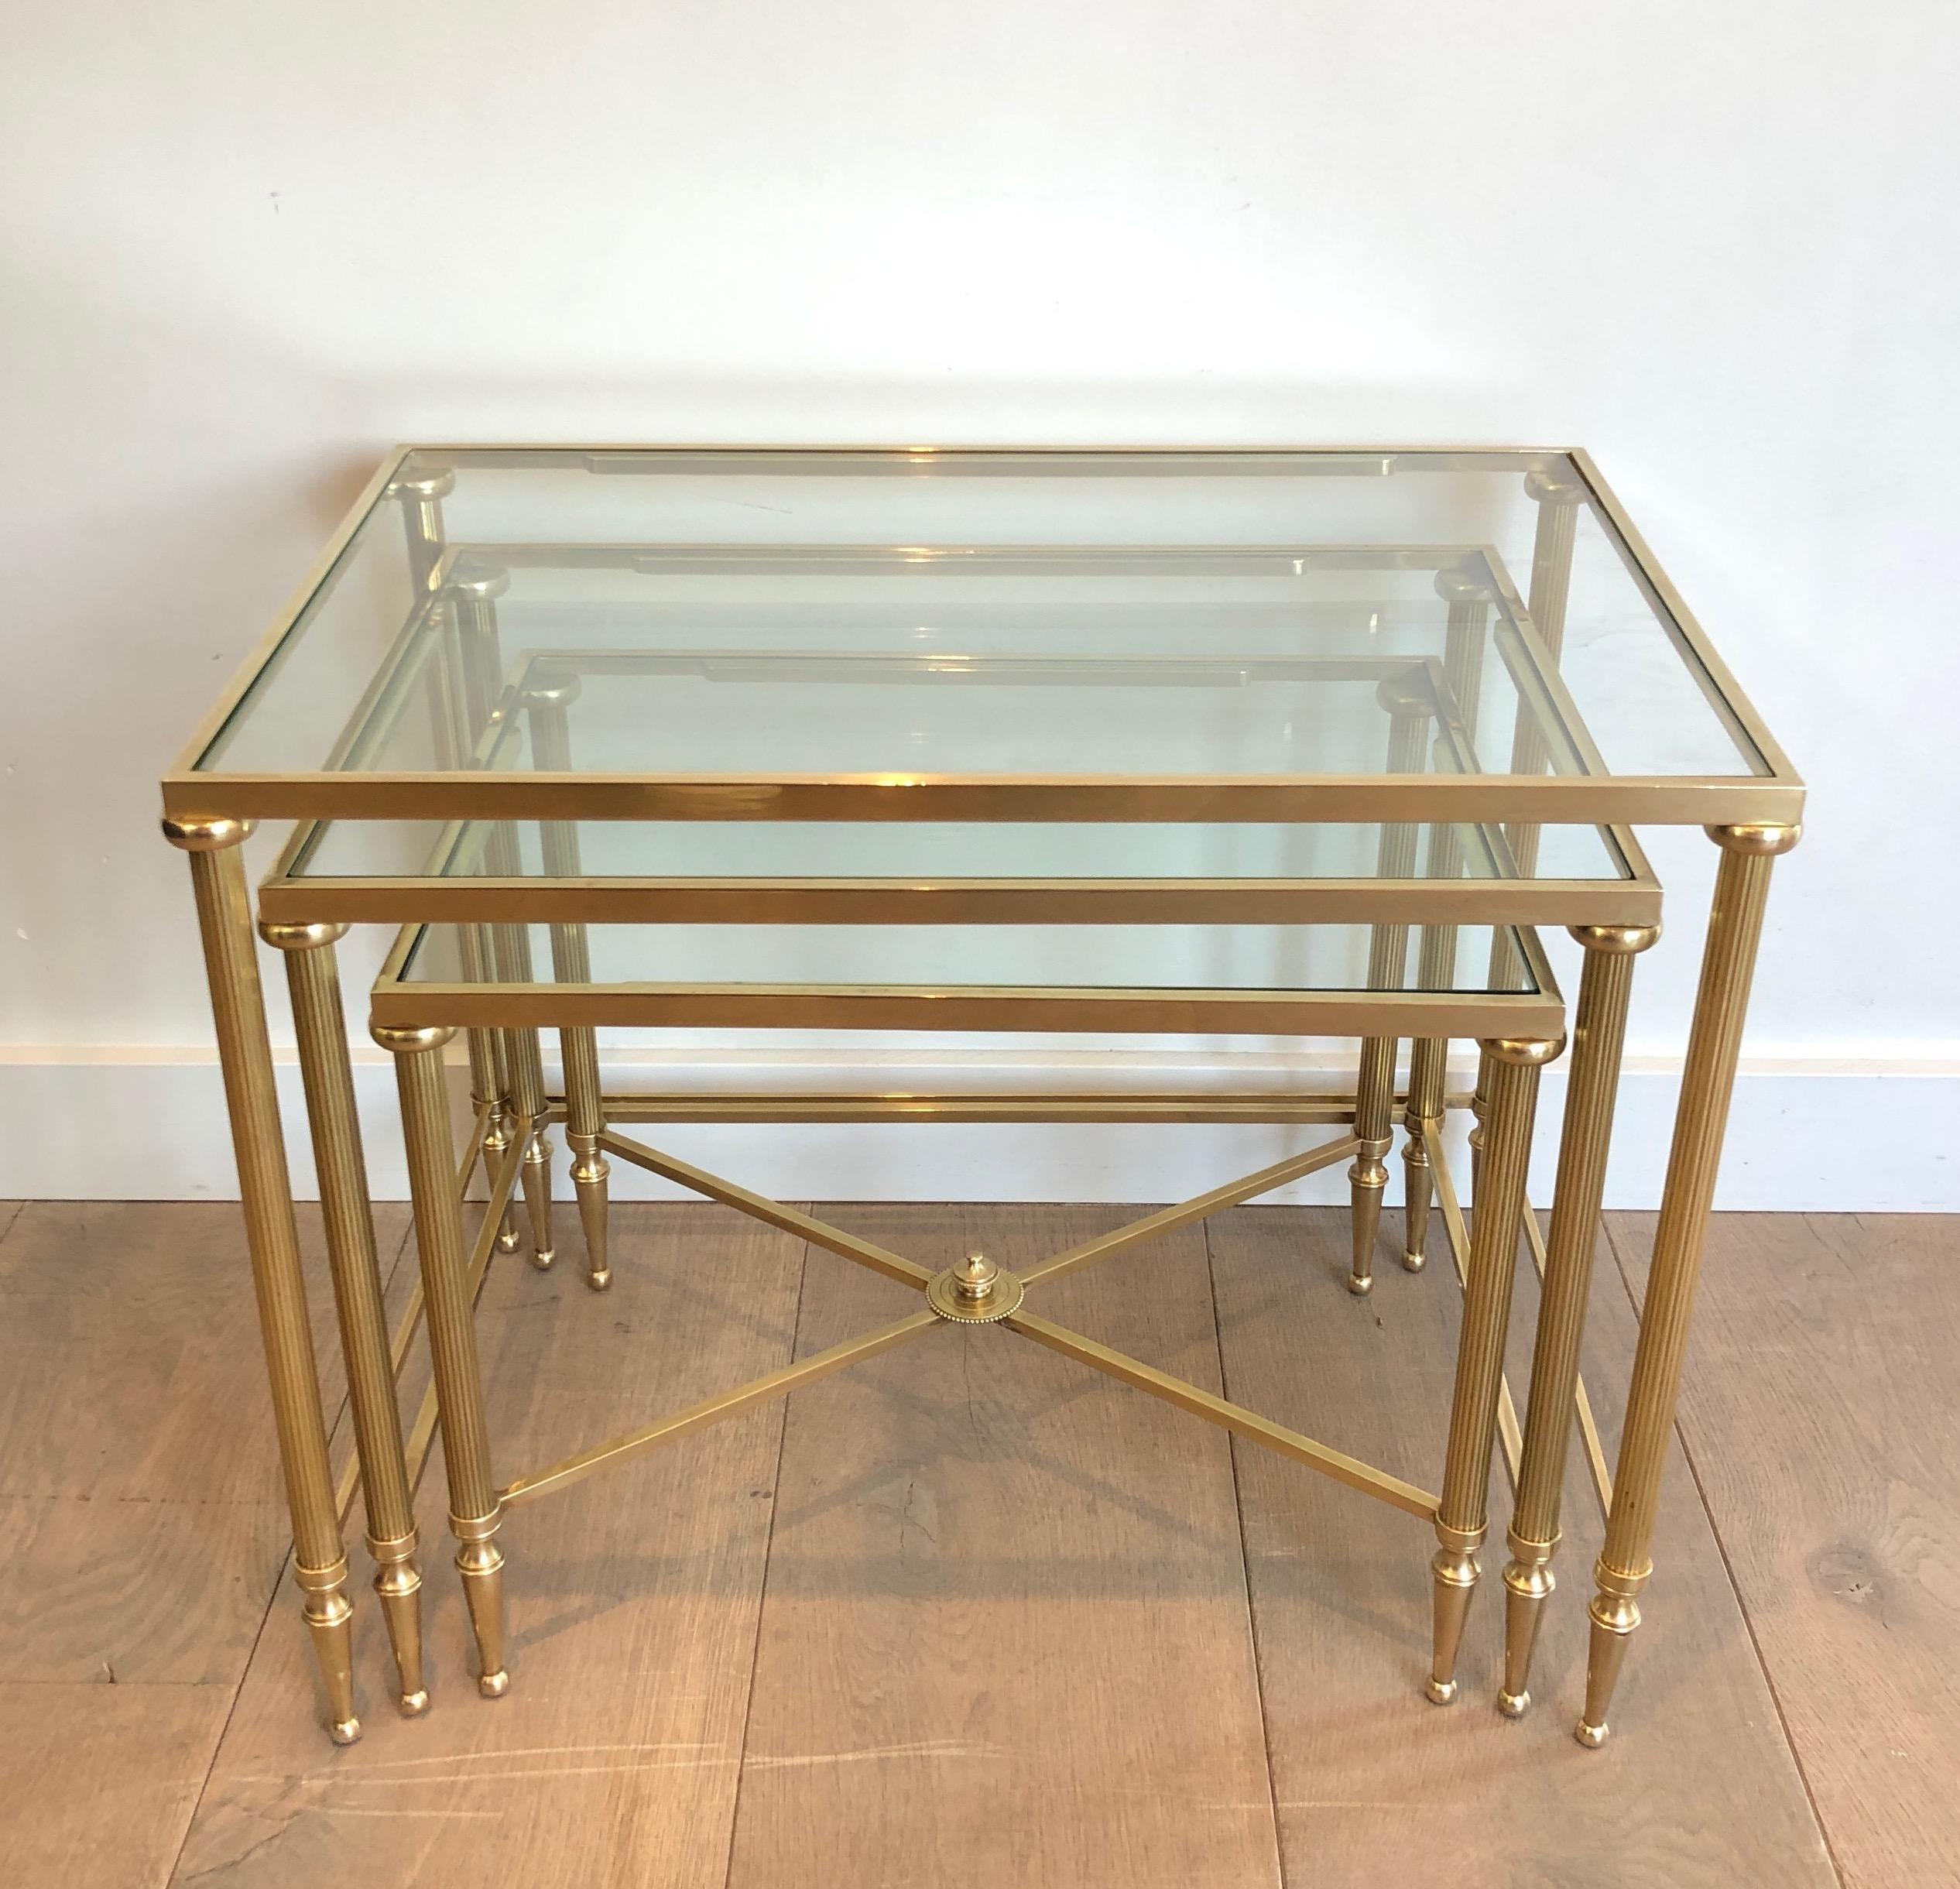 European Maison Jansen, Set of 3 Brass and Glass Nesting Tables, French, Circa 1940